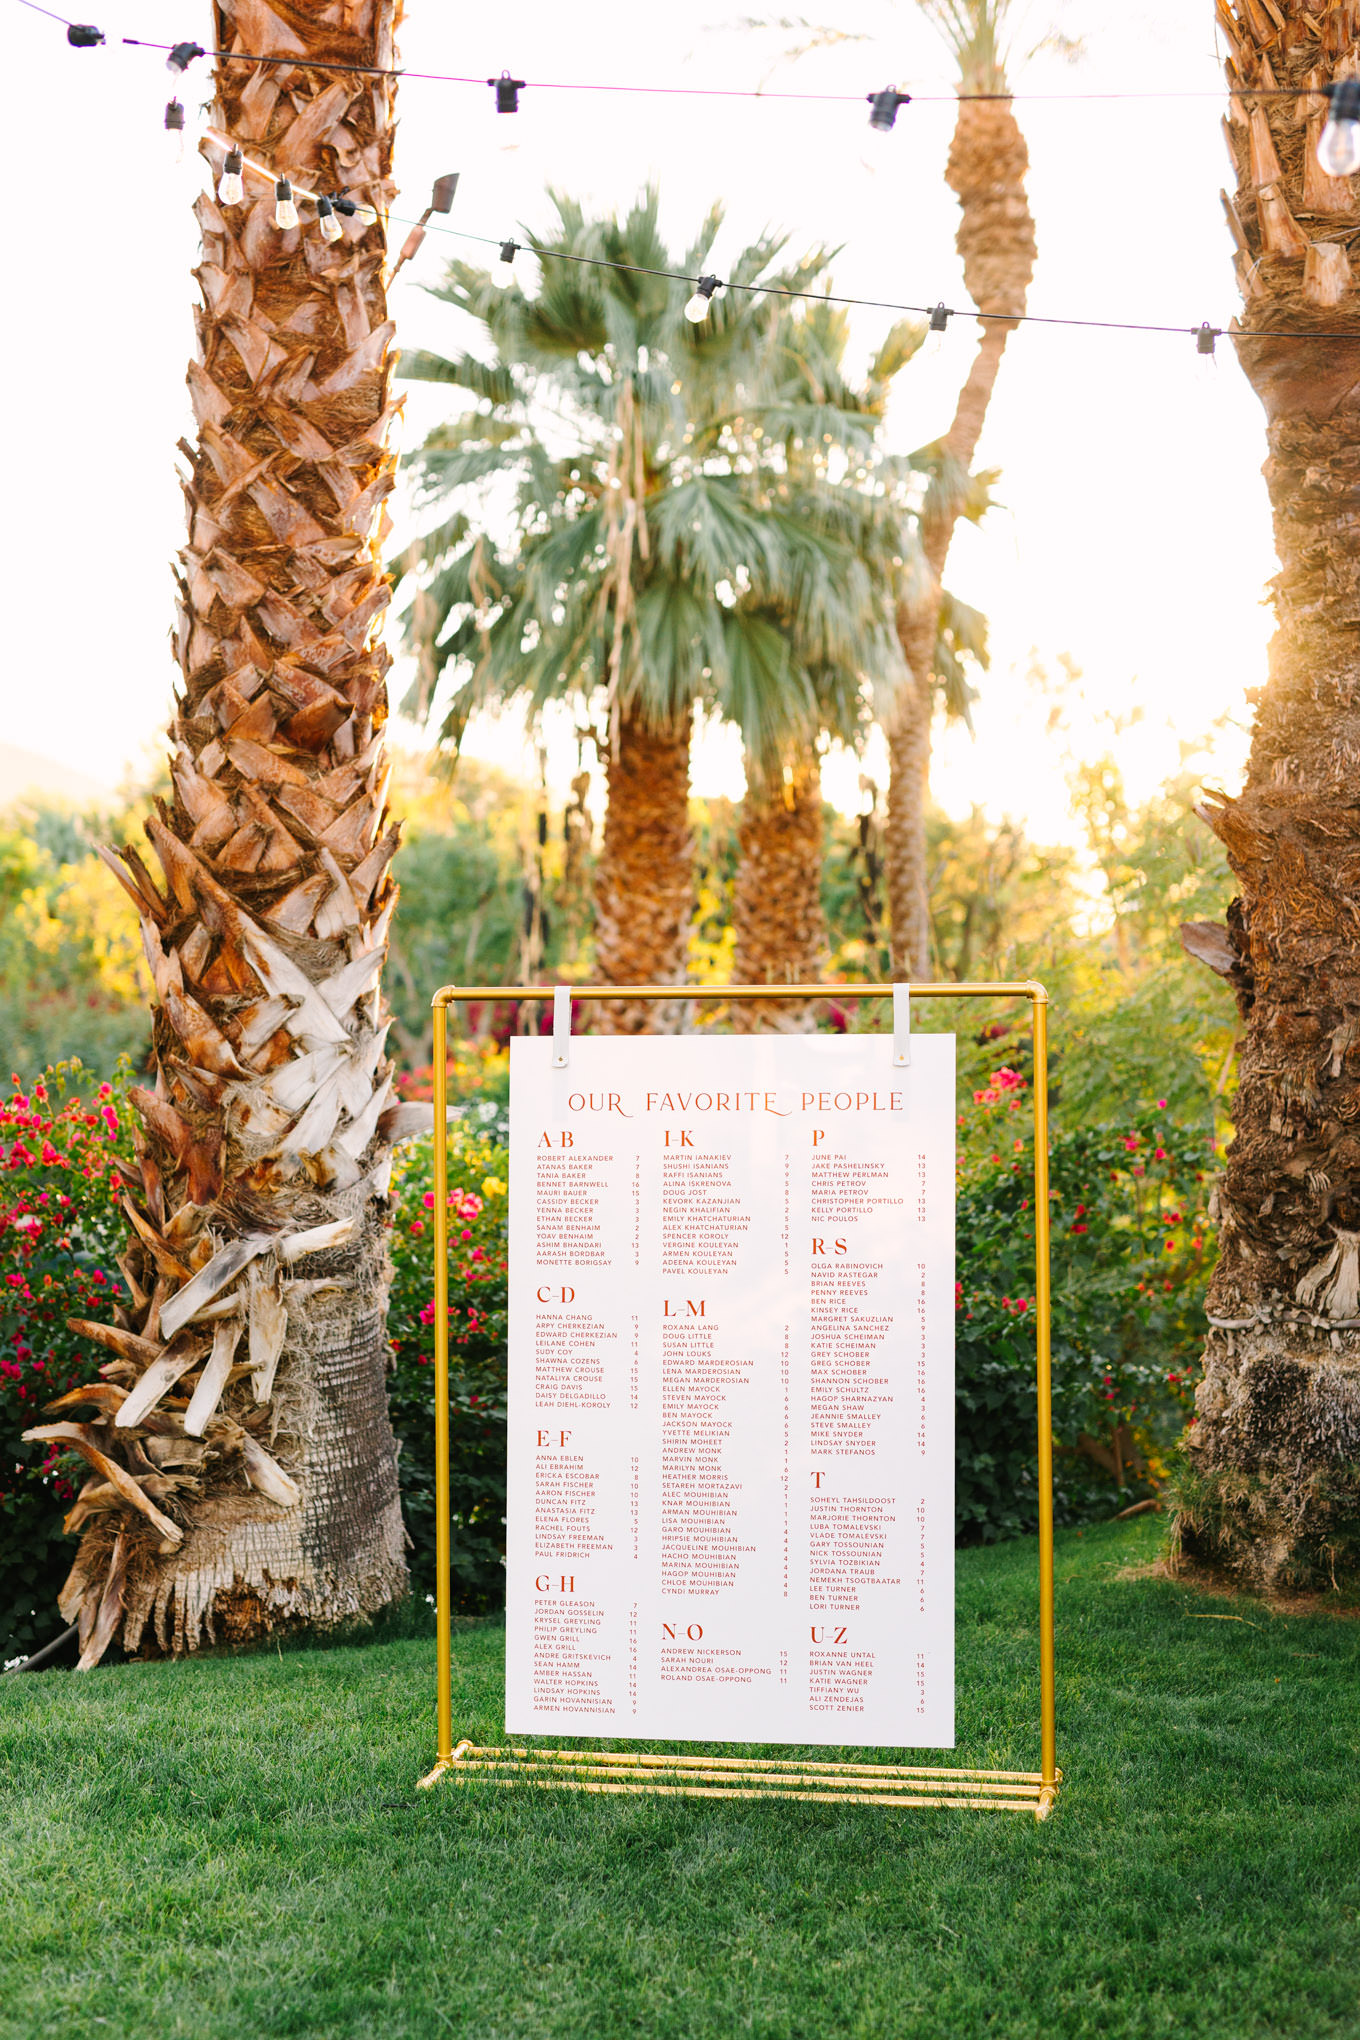 Seating chart | Pink Bougainvillea Estate wedding | Colorful LA wedding photography | #bougainvilleaestate #palmspringswedding #palmspringsweddingvenue #palmspringsphotographer Source: Mary Costa Photography | Los Angeles